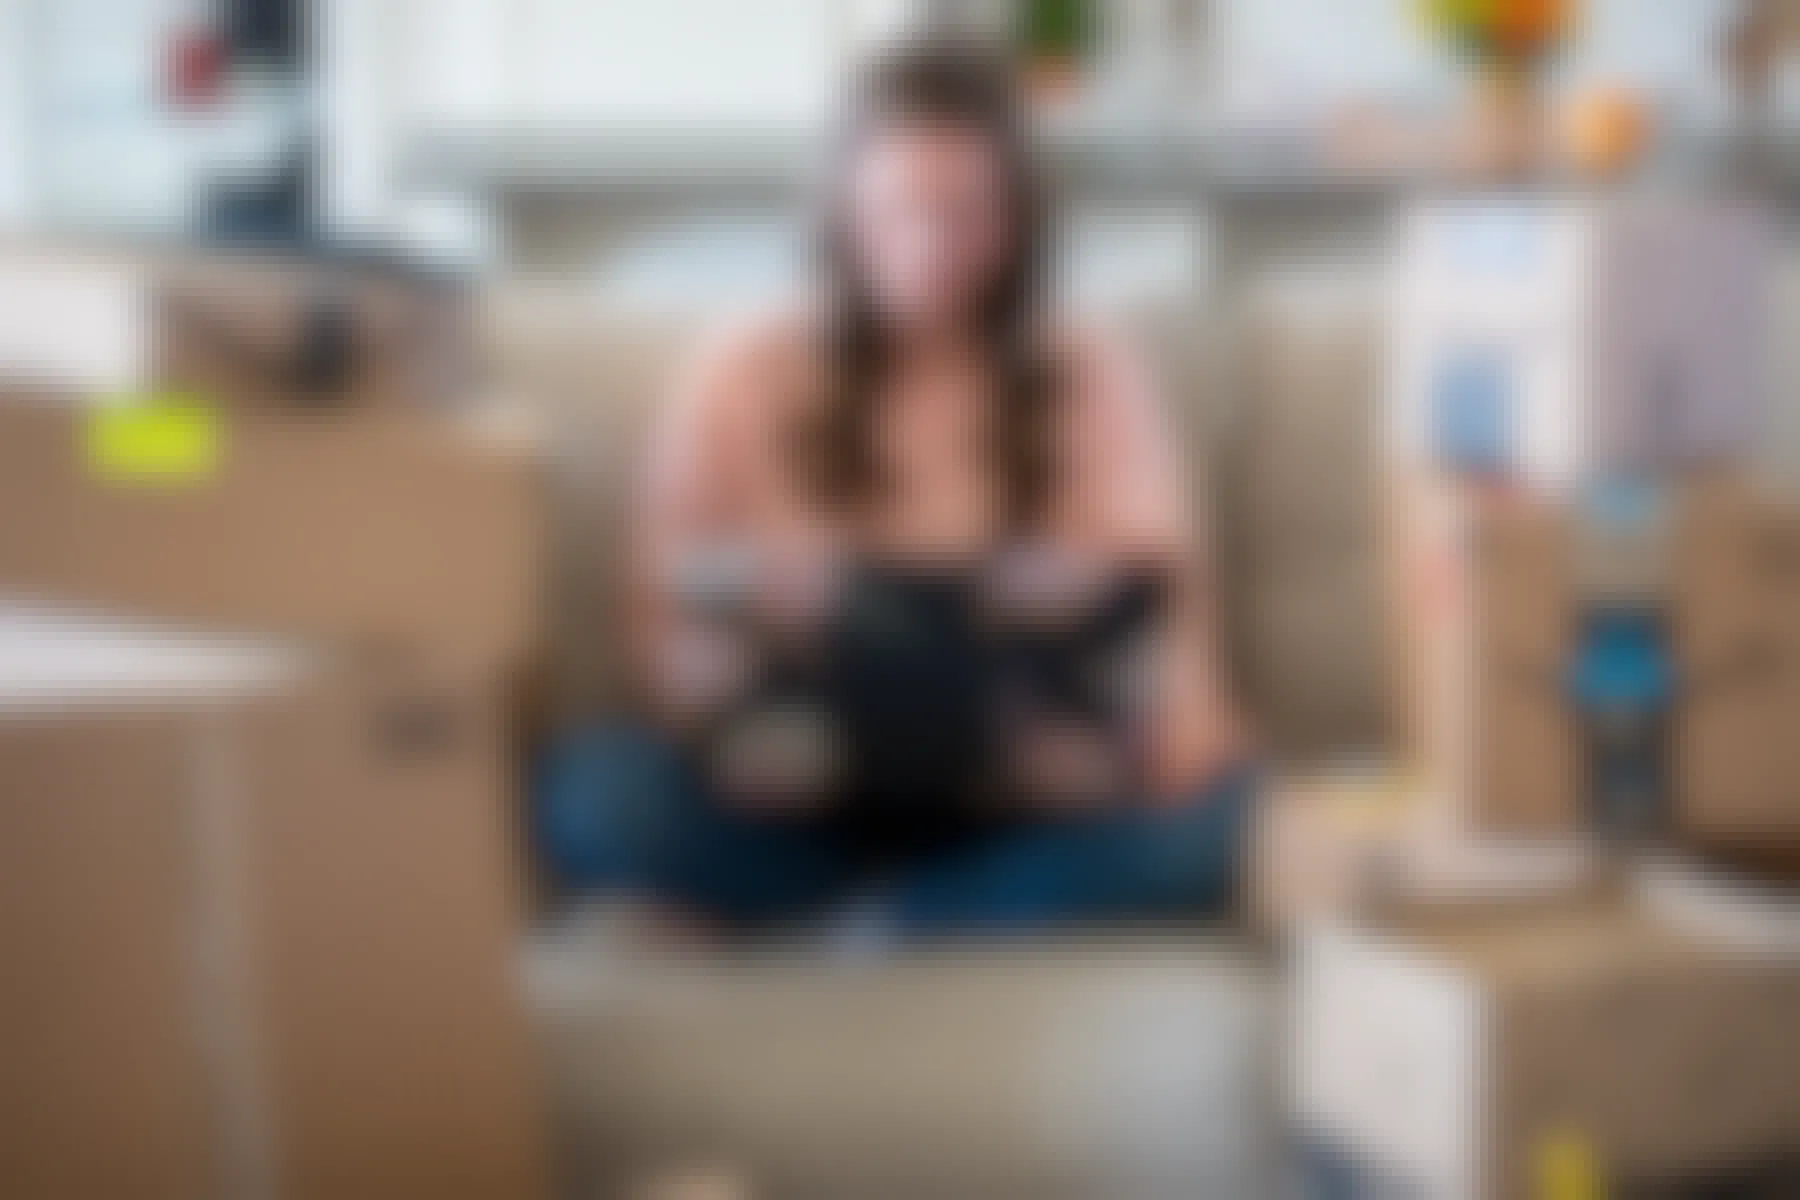 A woman sitting on a couch with a laptop computer one her lap, surrounded by amazon delivery boxes.